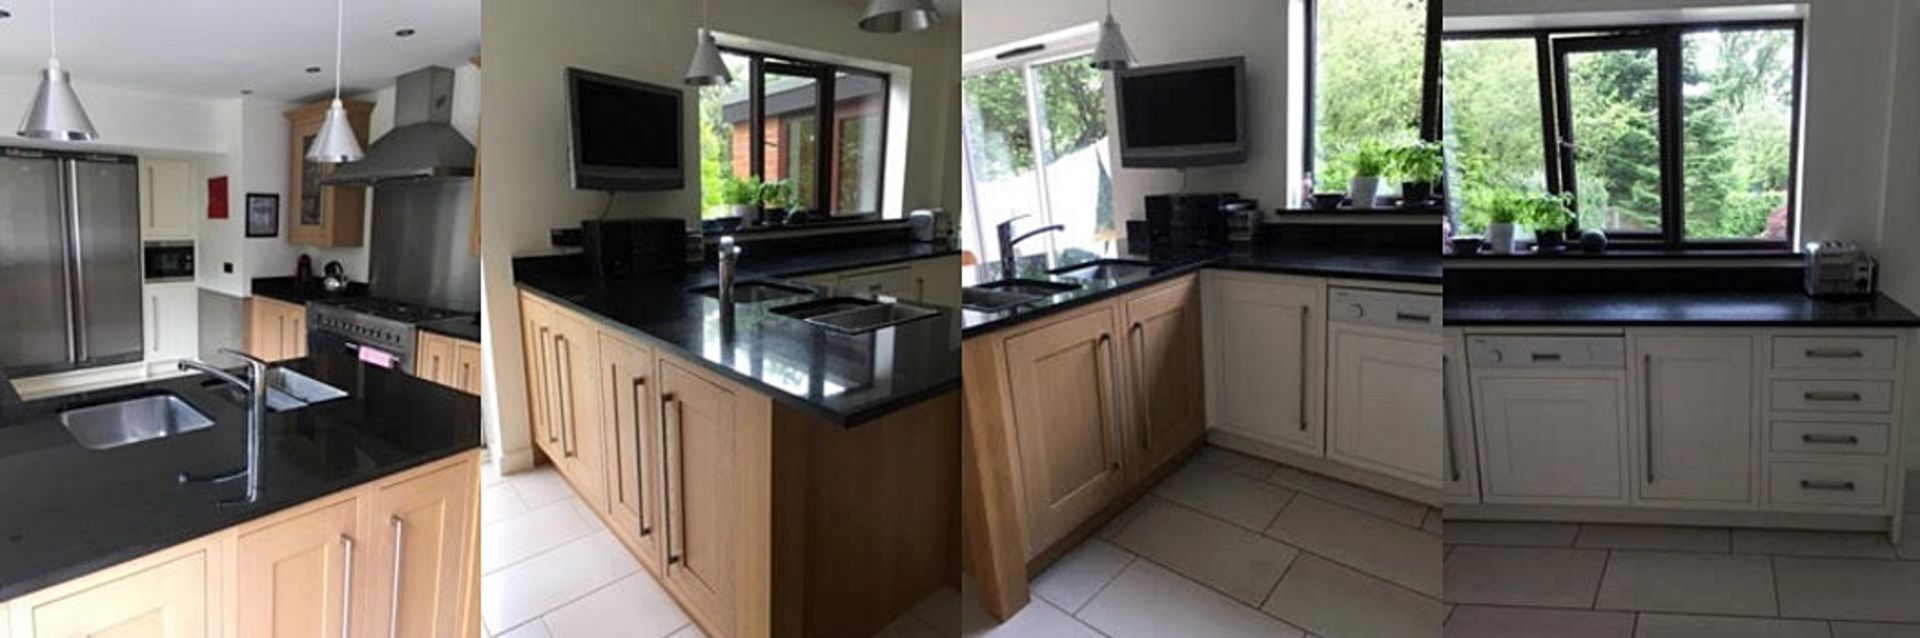 1 x Bespoke Solid Wood Fitted Kitchen With Granite Worktops - Pre-owned In Good Condtion - CL172 -